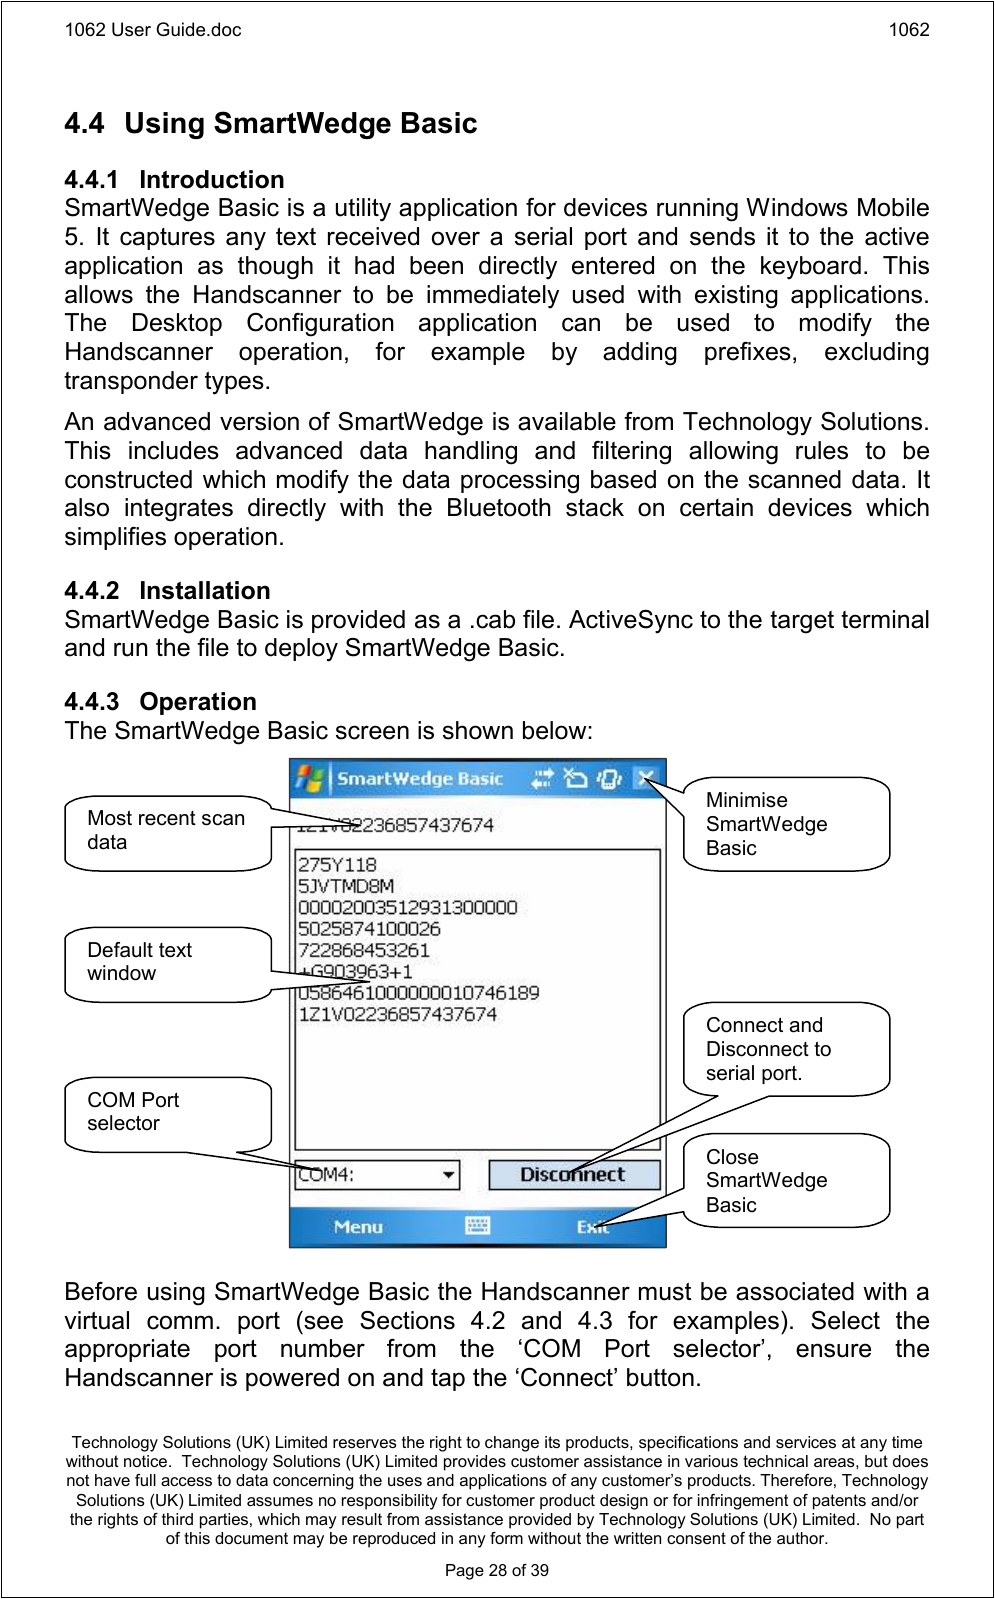 1062 User Guide.doc 1062Technology Solutions (UK) Limited reserves the right to change its products, specifications and services at any time without notice.  Technology Solutions (UK) Limited provides customer assistance in various technical areas, but does not have full access to data concerning the uses and applications of any customer’s products. Therefore, Technology Solutions (UK) Limited assumes no responsibility for customer product design or for infringement of patents and/or the rights of third parties, which may result from assistance provided by Technology Solutions (UK) Limited.  No part of this document may be reproduced in any form without the written consent of the author.Page 28 of 394.4 Using SmartWedge Basic4.4.1 IntroductionSmartWedge Basic is a utility application for devices running Windows Mobile 5.  It  captures any text  received  over  a  serial  port  and  sends  it  to  the  active application  as  though  it  had  been  directly  entered  on  the  keyboard.  This allows  the  Handscanner  to  be  immediately  used  with  existing  applications. The  Desktop  Configuration  application  can  be  used  to  modify  the Handscanner  operation,  for  example  by  adding  prefixes,  excluding transponder types.An advanced version of SmartWedge is available from Technology Solutions. This  includes  advanced  data  handling  and  filtering  allowing  rules  to  be constructed which modify the data processing based on the scanned data. It also  integrates  directly  with  the  Bluetooth  stack  on  certain  devices  which simplifies operation.4.4.2 InstallationSmartWedge Basic is provided as a .cab file. ActiveSync to the target terminal and run the file to deploy SmartWedge Basic.4.4.3 OperationThe SmartWedge Basic screen is shown below:Before using SmartWedge Basic the Handscanner must be associated with a virtual  comm.  port  (see  Sections  4.2  and  4.3  for  examples).  Select  the appropriate  port  number  from  the  ‘COM  Port  selector’,  ensure  the Handscanner is powered on and tap the ‘Connect’ button.Minimise SmartWedge BasicClose SmartWedge BasicConnect and Disconnect to serial port.COM Port selectorDefault text windowMost recent scan data